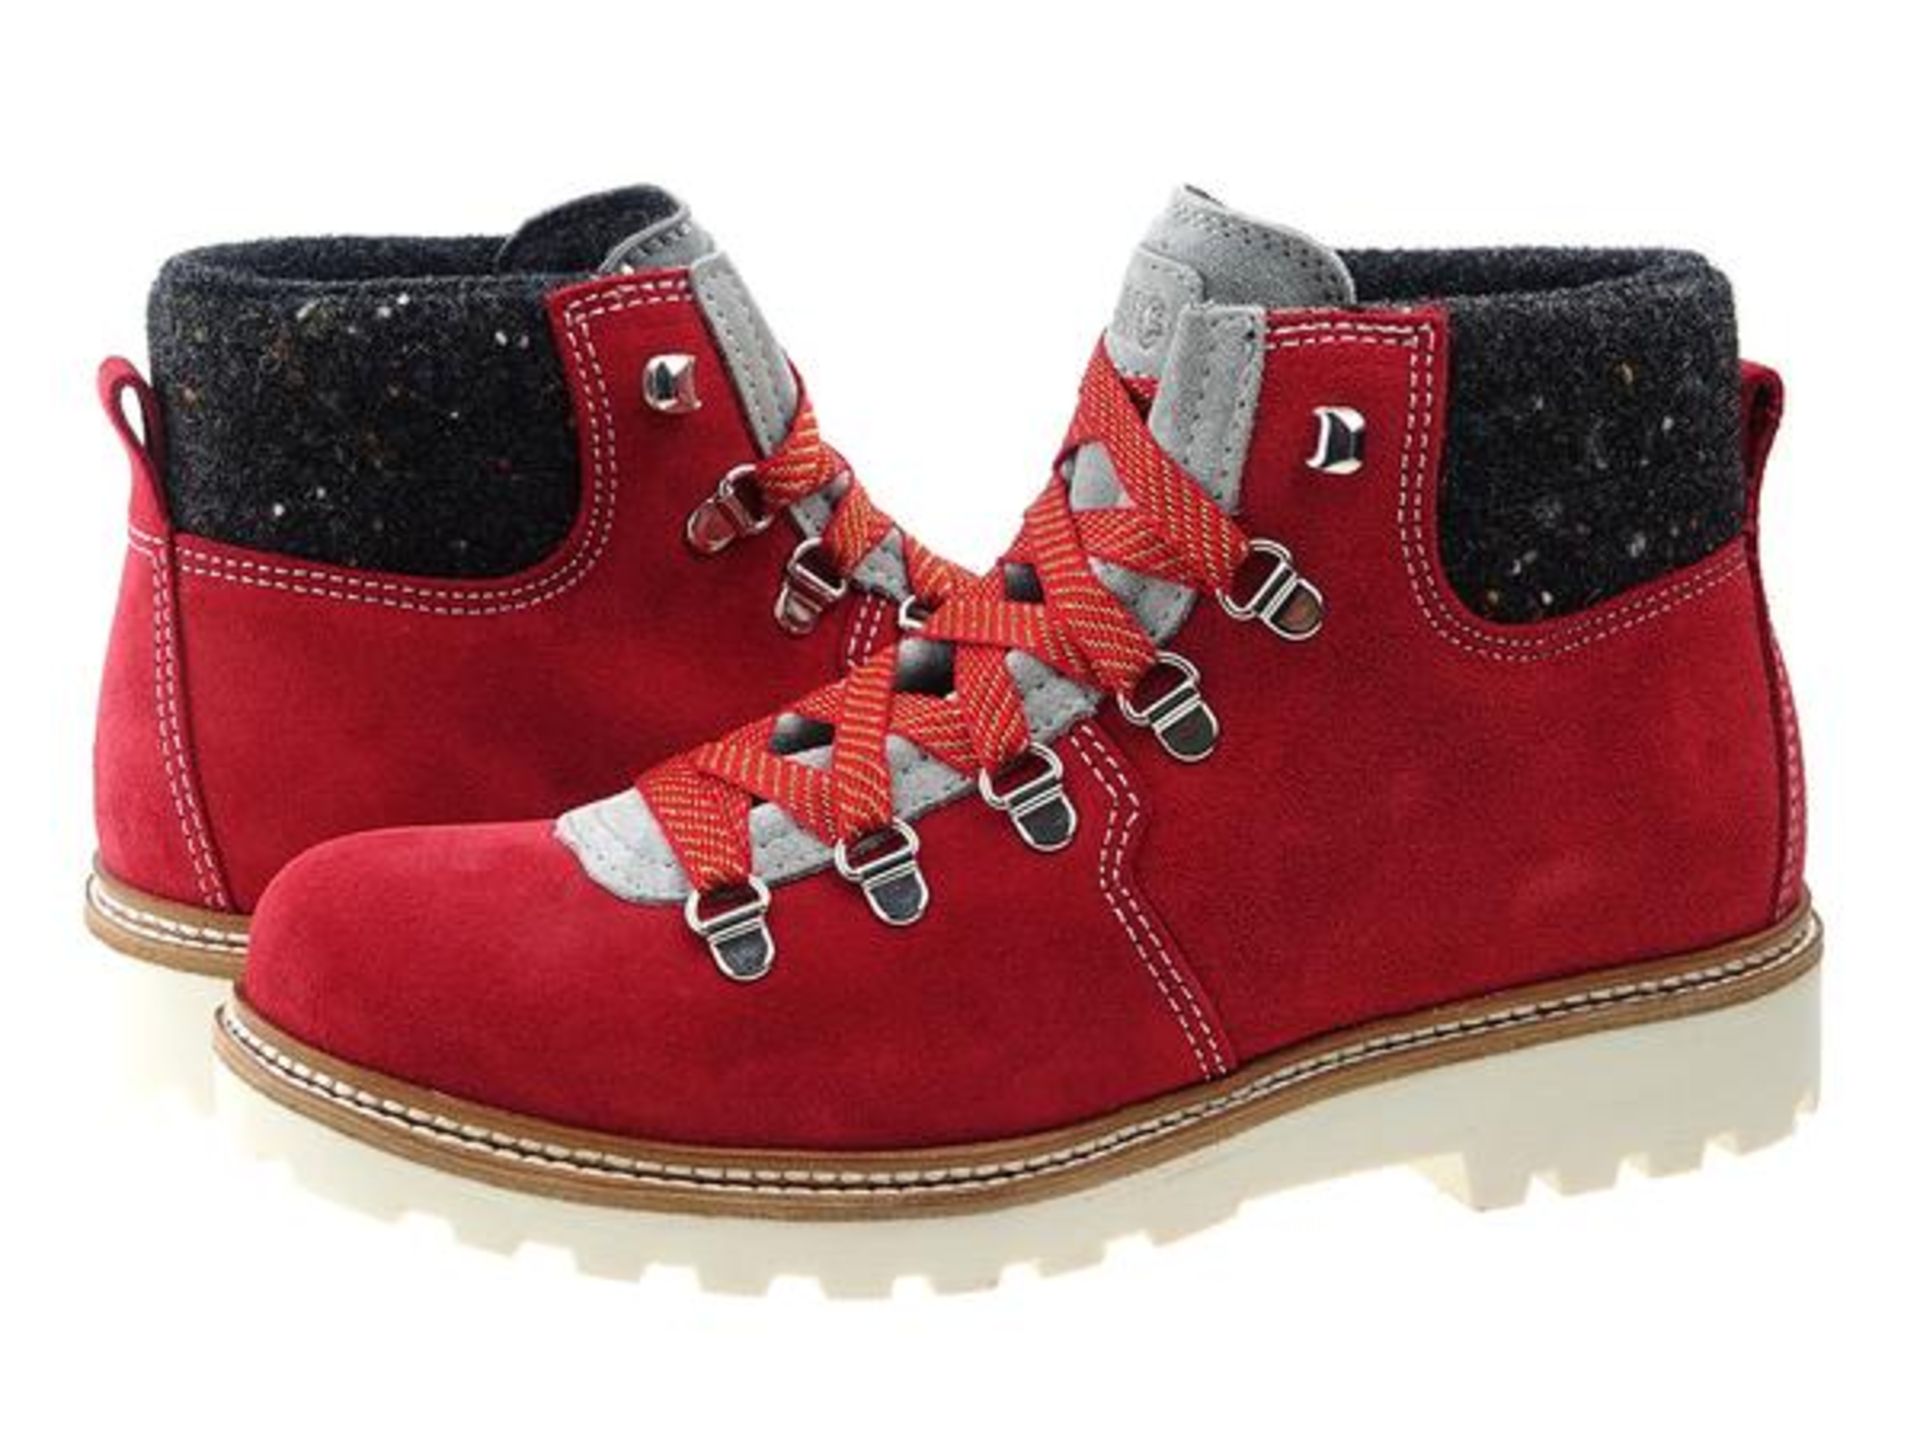 1 x Pair of Designer Olang Merano BTX 815 Rosso Women's Winter Boots - Euro Size 41 - Brand New - Image 3 of 4